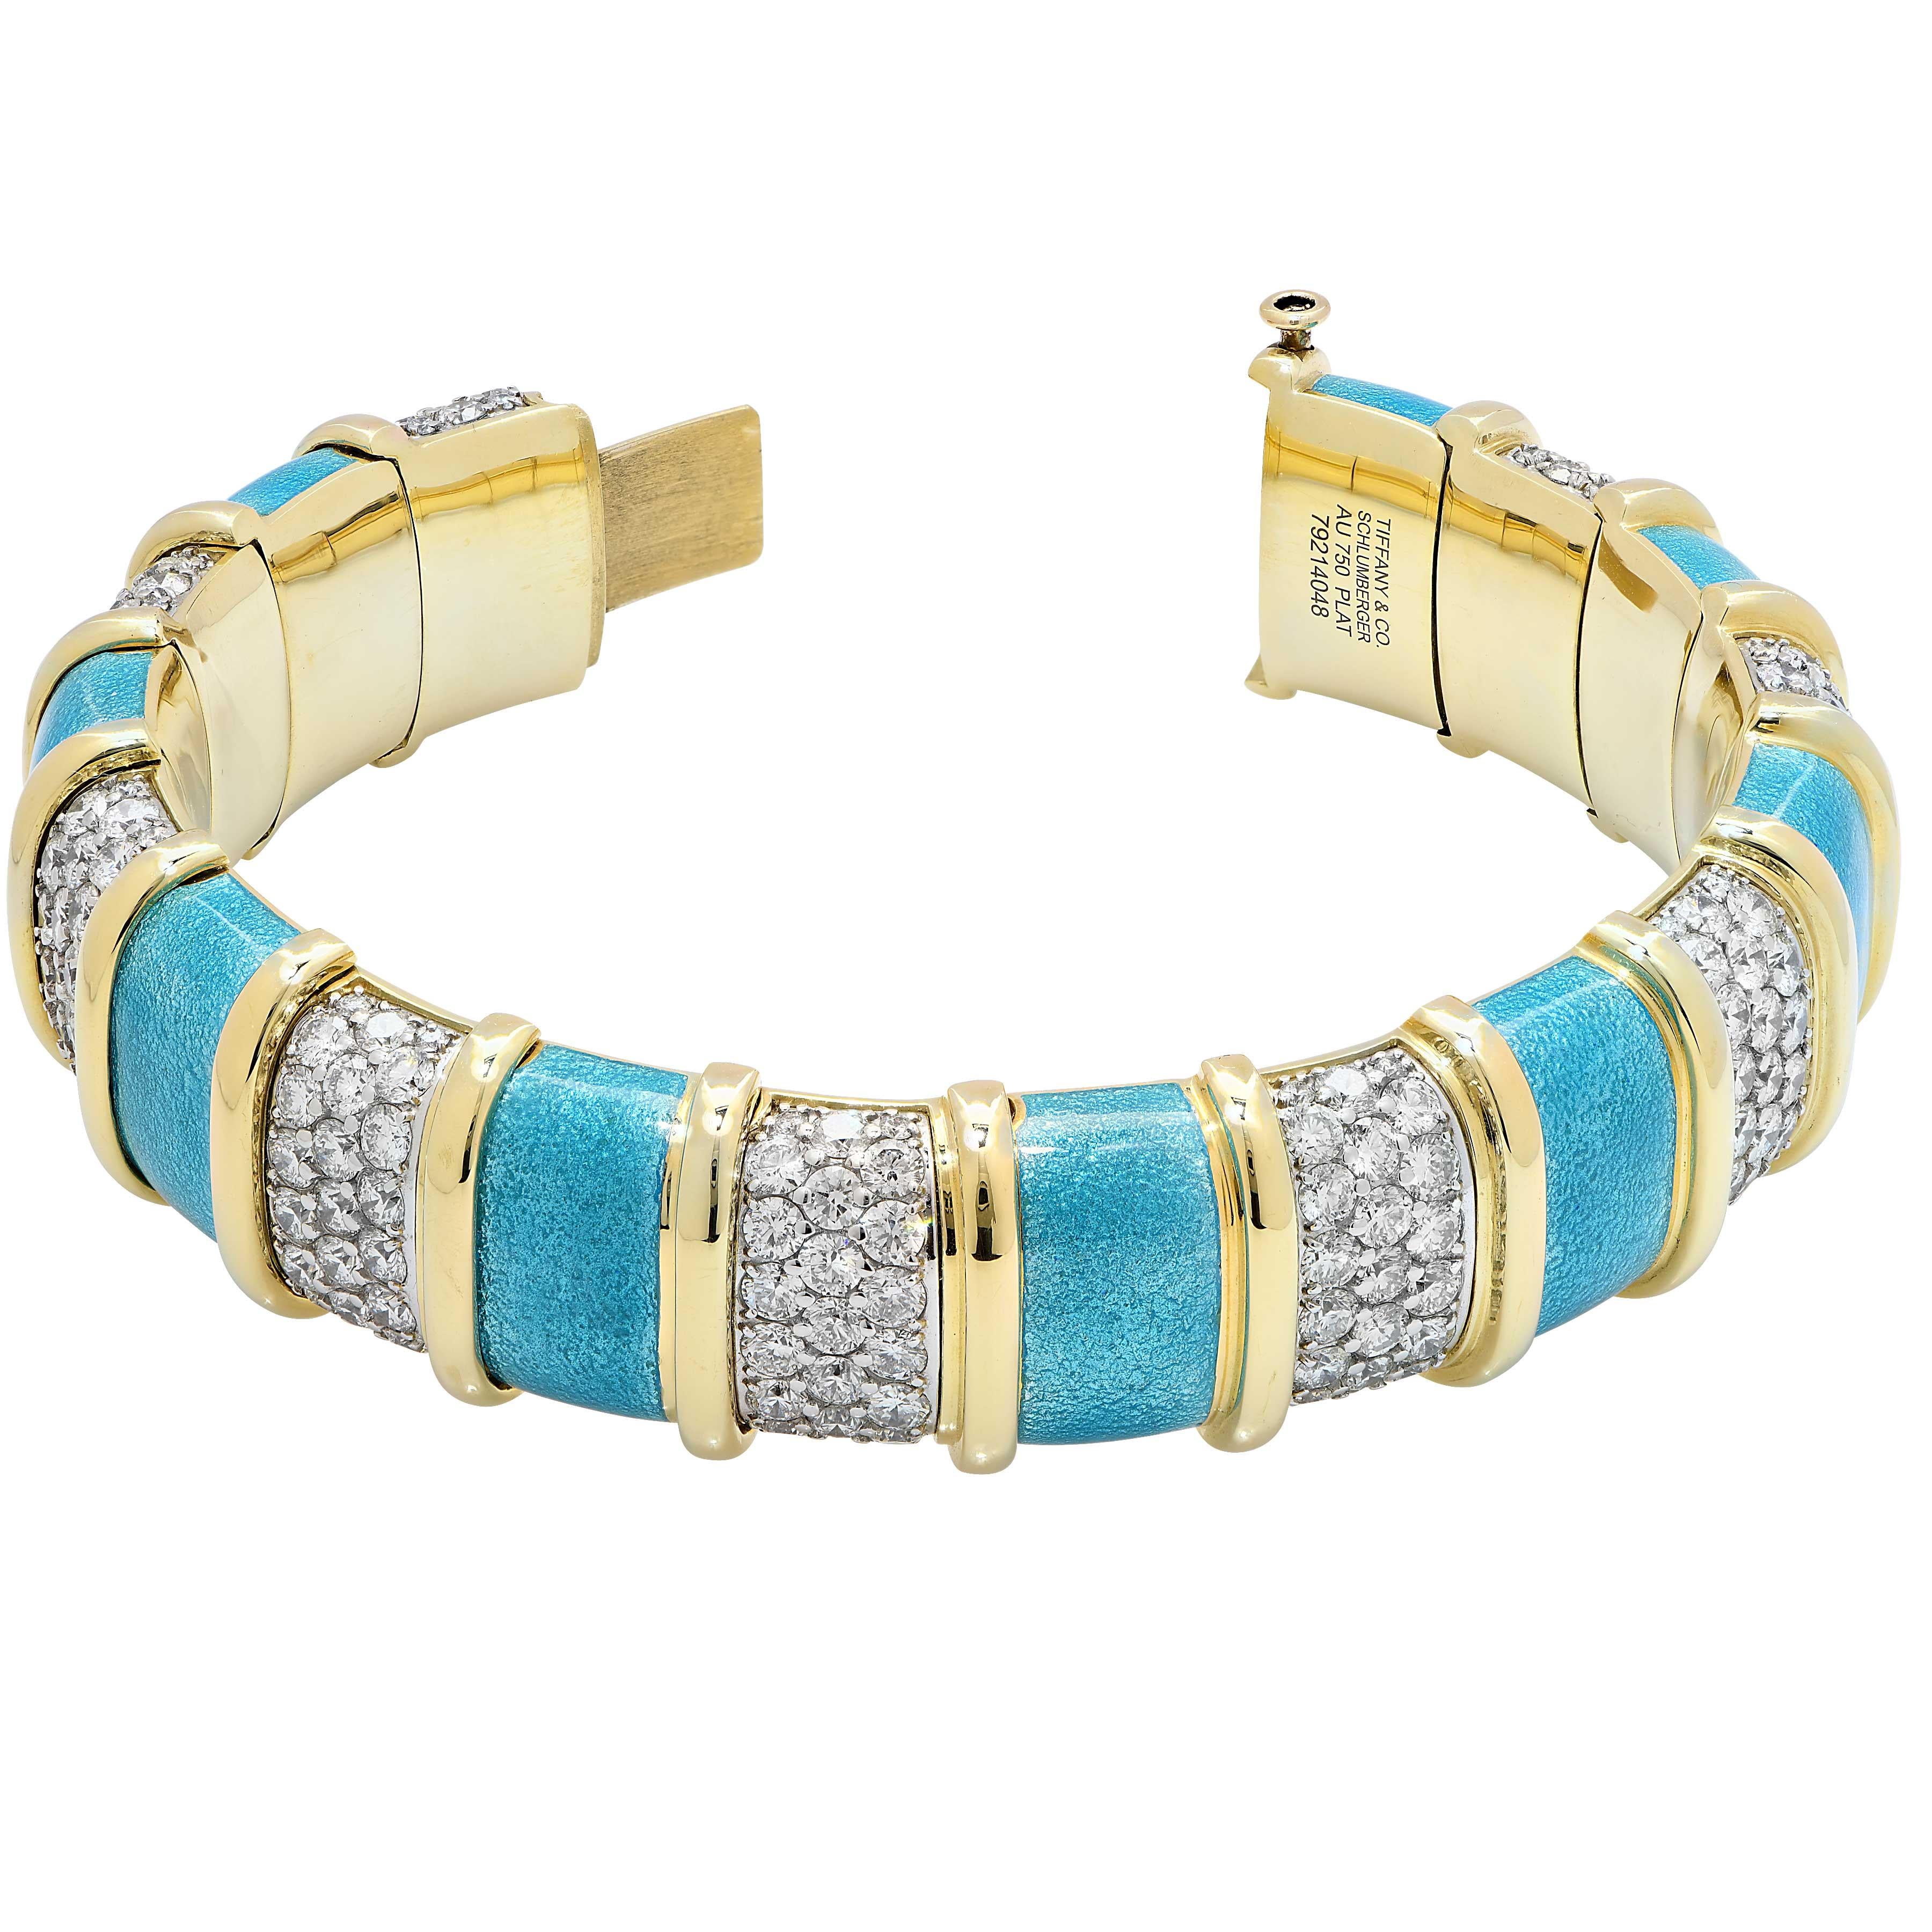 Tiffany Schlumberger Blue Enamel and Diamond Bracelet featuring 9 links with a total of 207 prong set round brilliant cut diamonds with a total estimated carat weight of 20 carats set in platinum and nine panels of blue enamel in 18 karat yellow